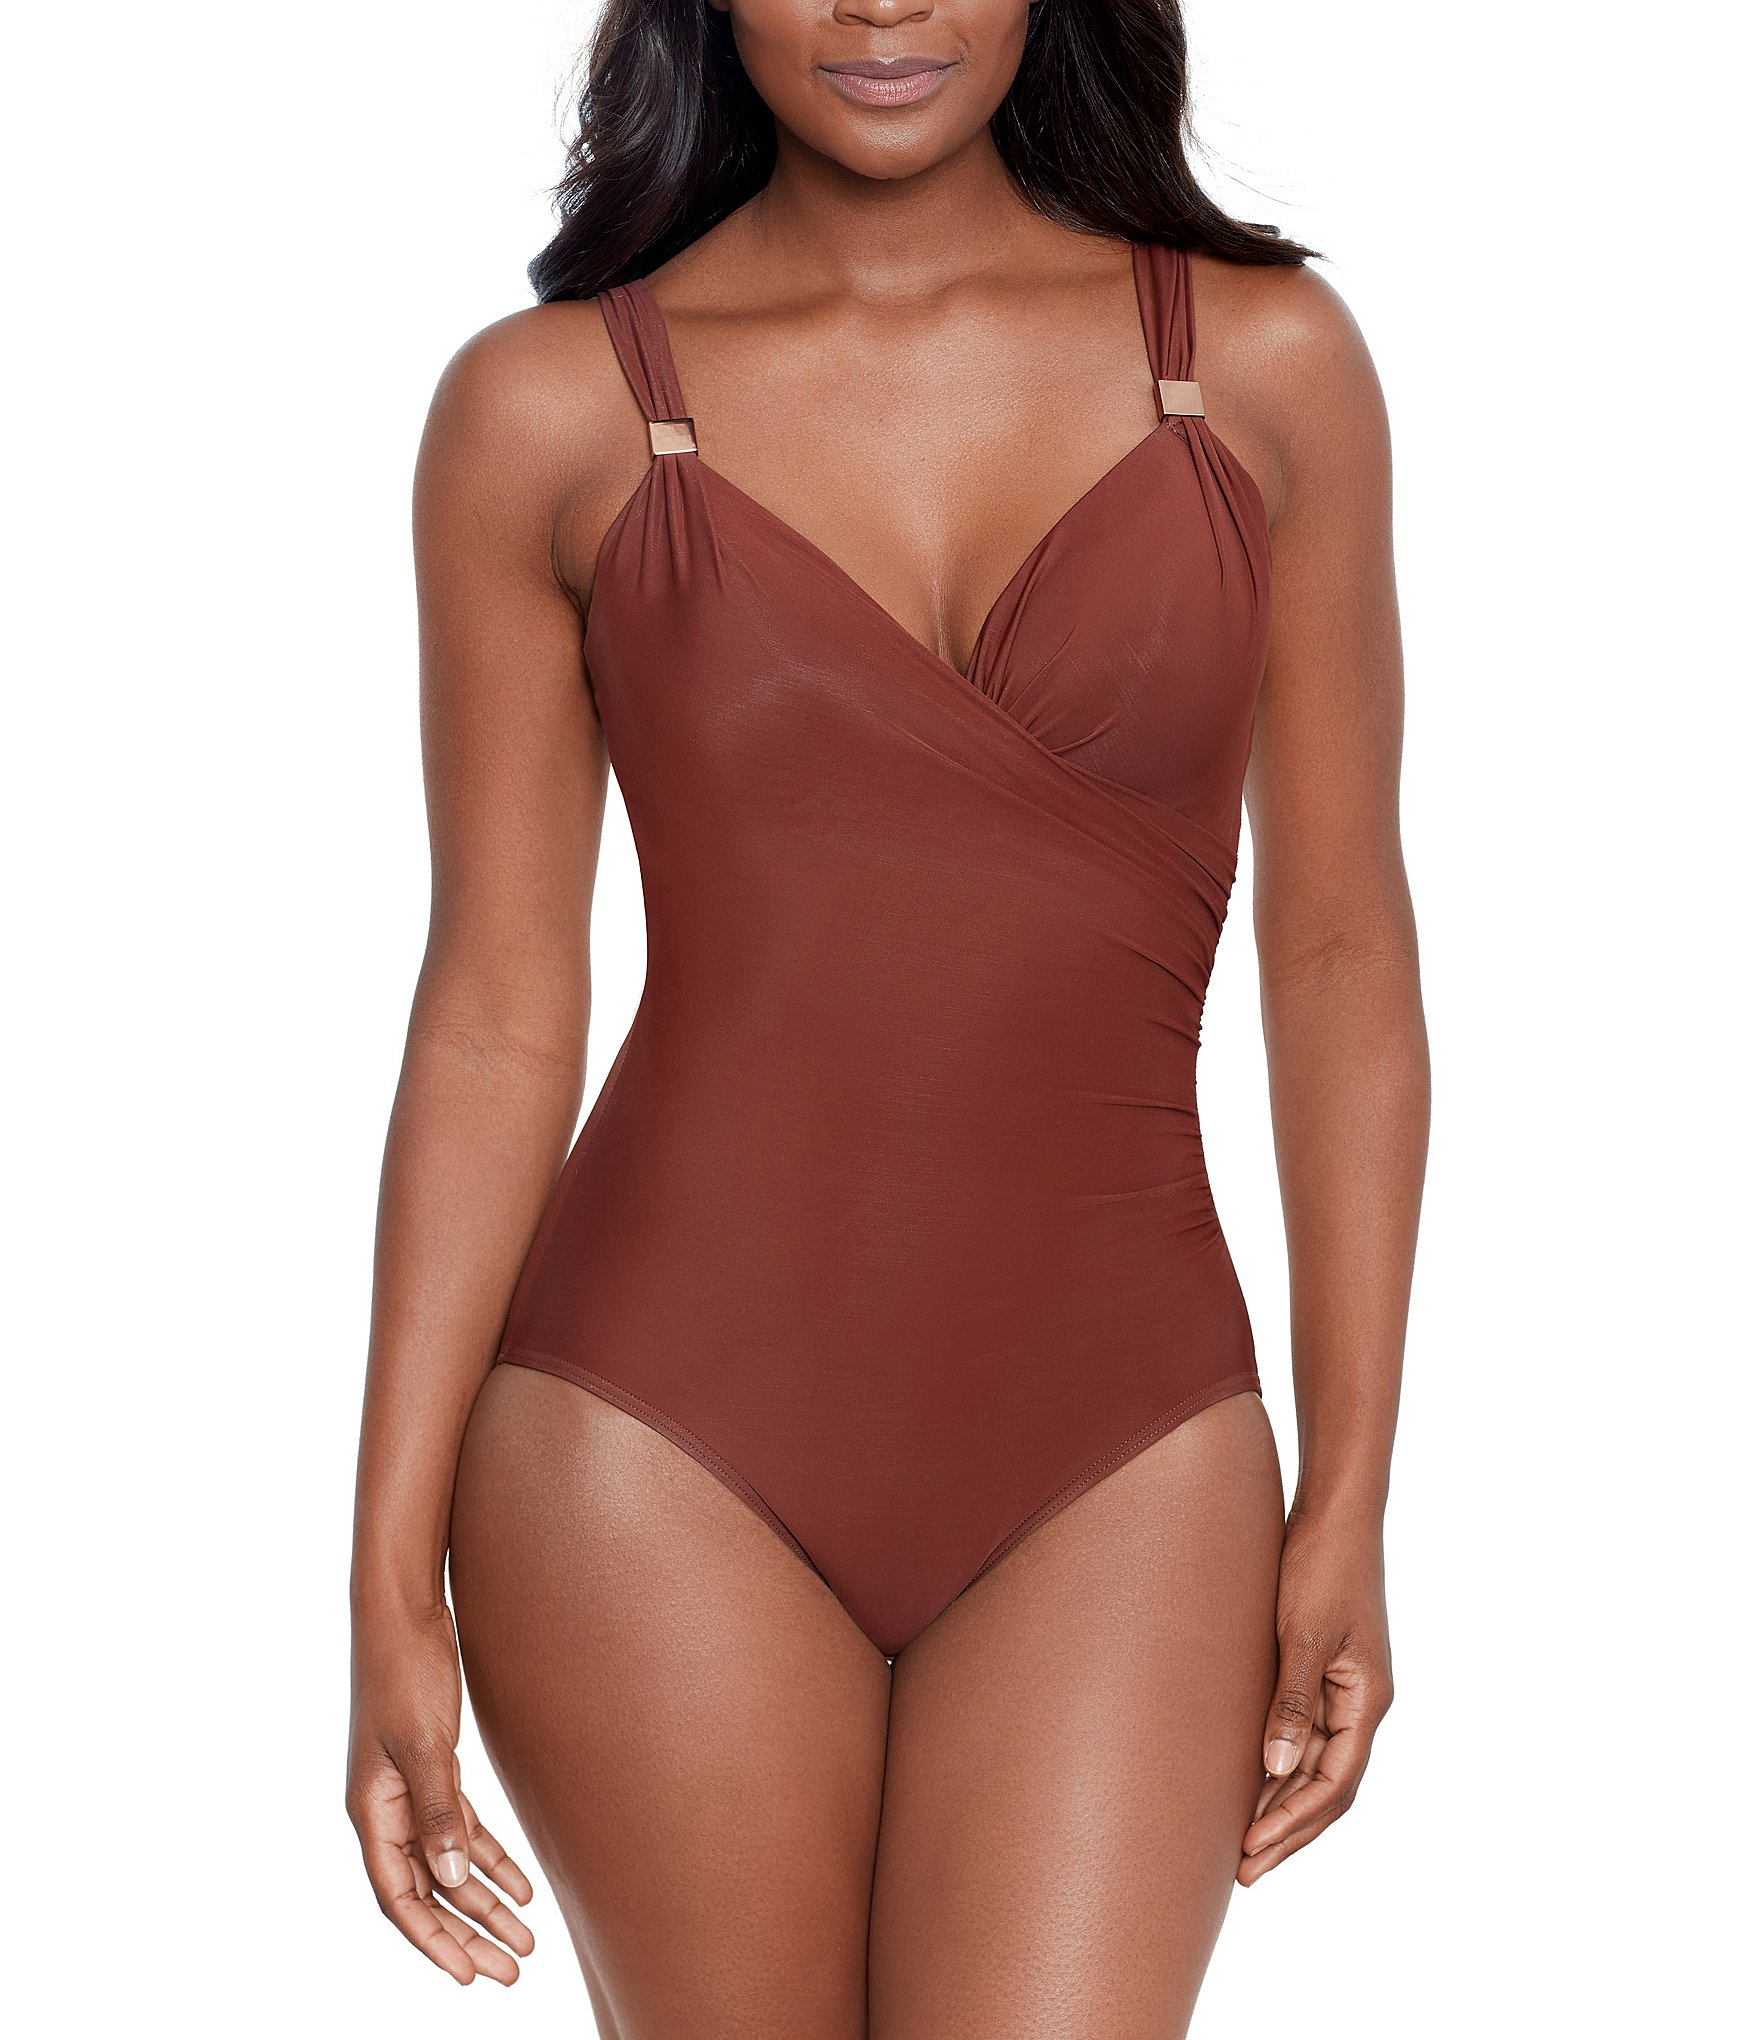 Miraclesuit Spectra Somerpointe One Piece Swimsuit